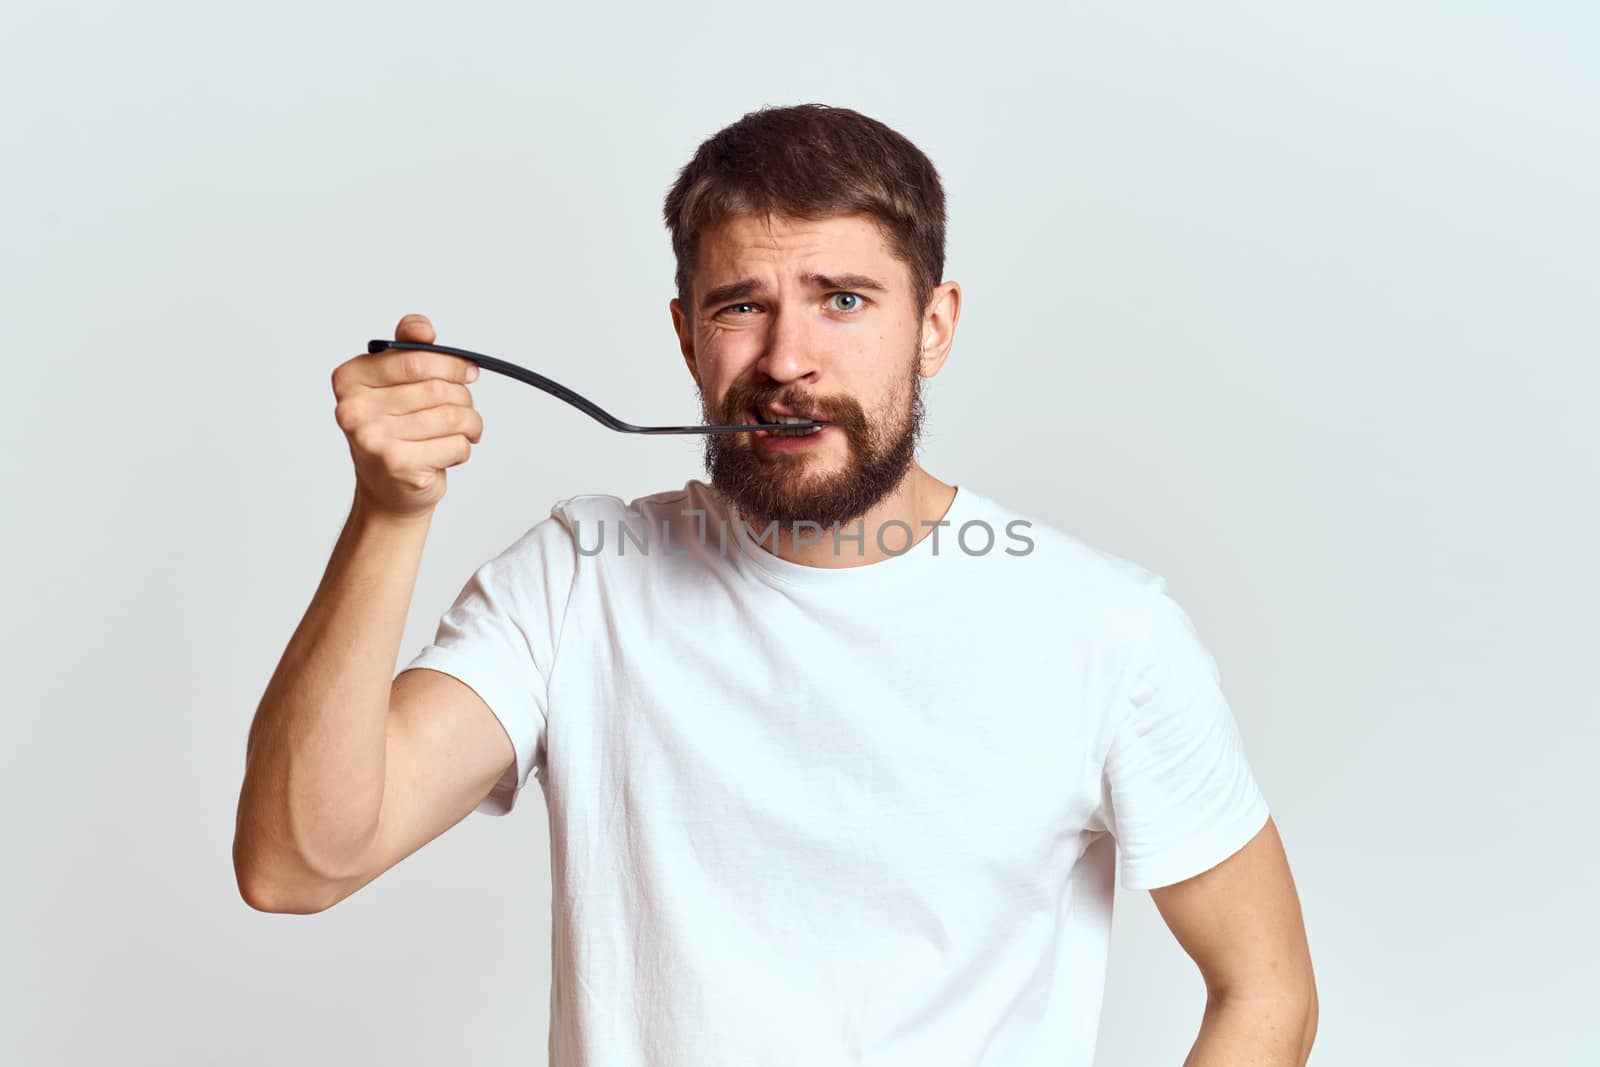 man with cooking shovel and white t-shirt close-up cropped view emotion gesturing with hand by SHOTPRIME